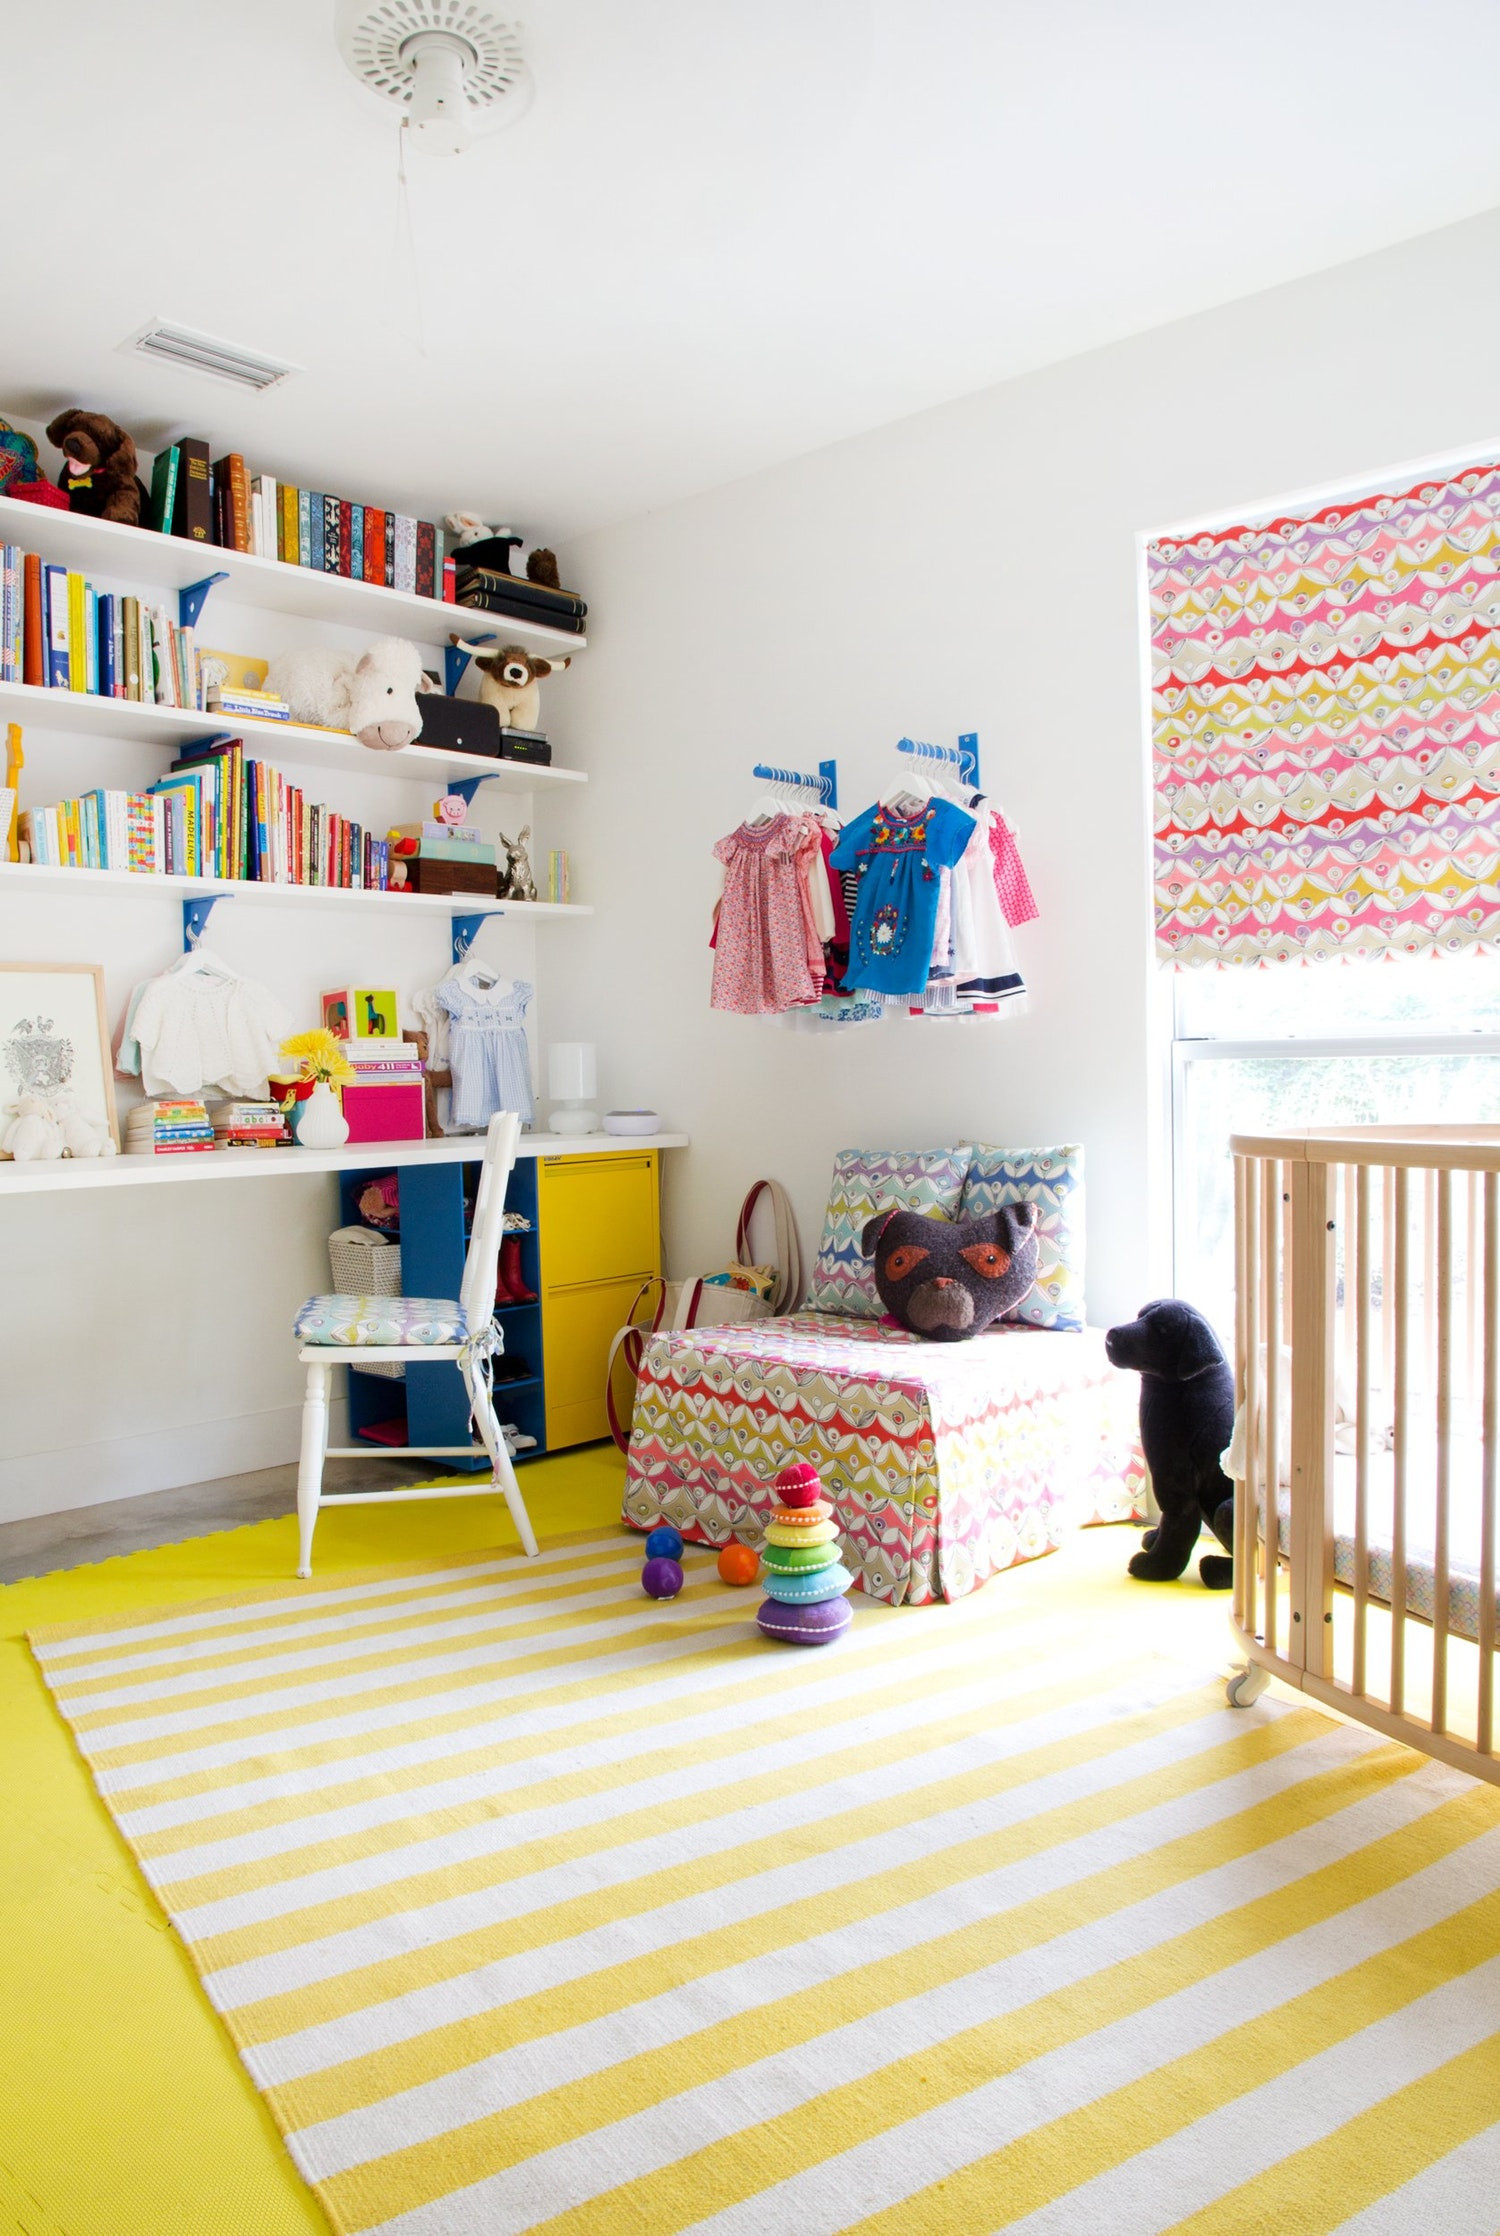 Storage Shelves For Kids Room
 30 Smart Storage Ideas for Small Spaces